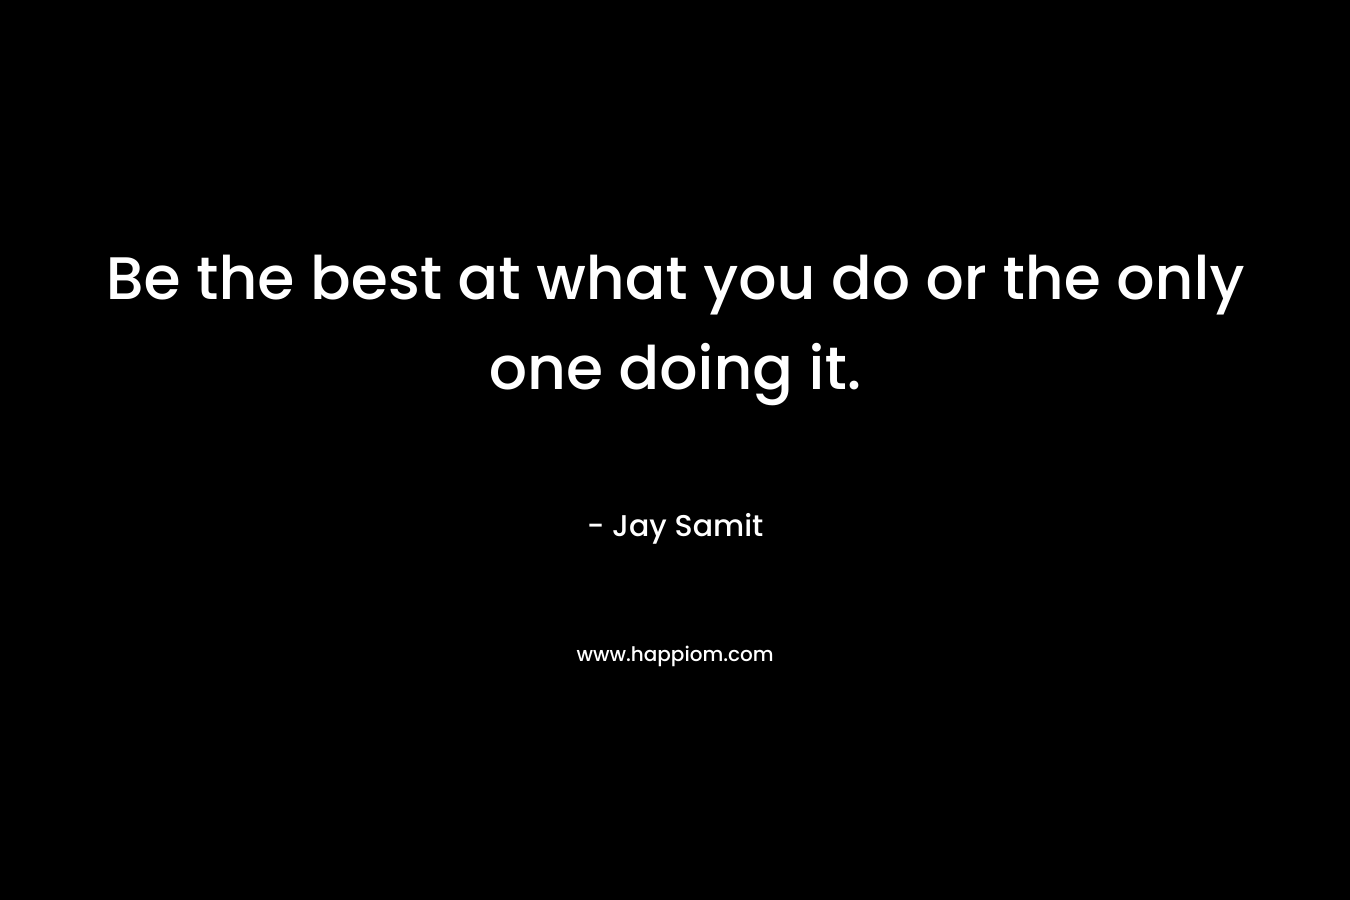 Be the best at what you do or the only one doing it.